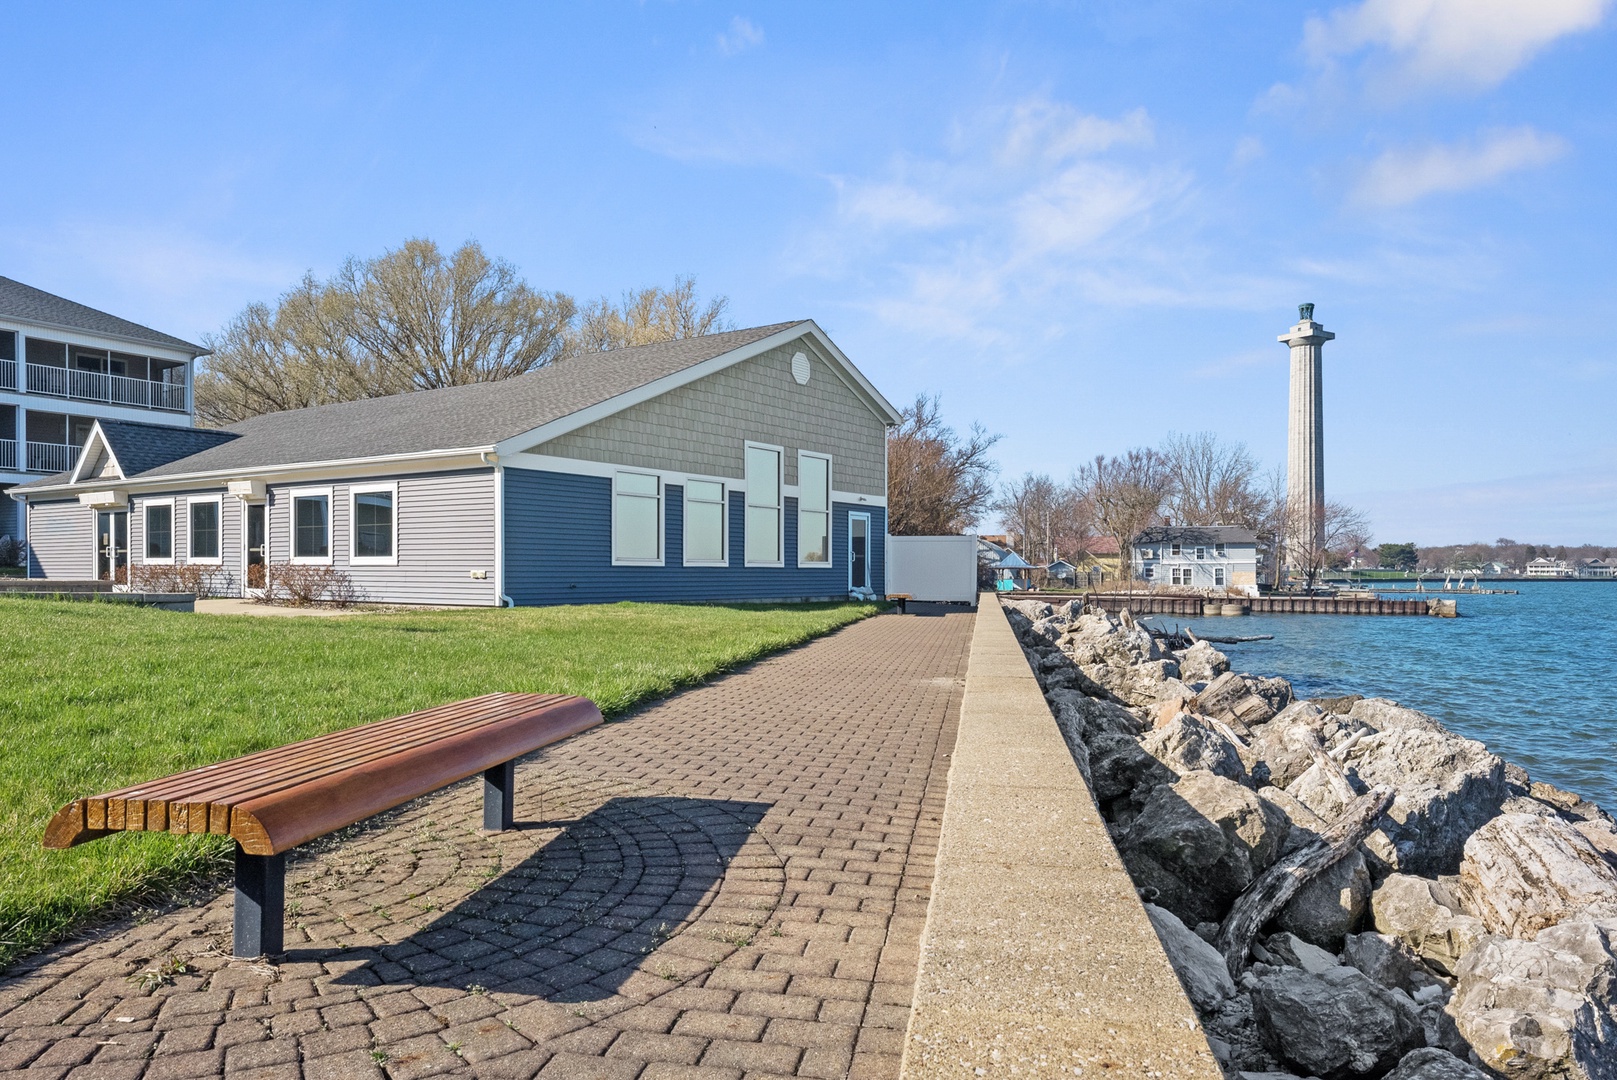 Discover Serenity and Style at Bayshore Resort on Put-in-Bay Island